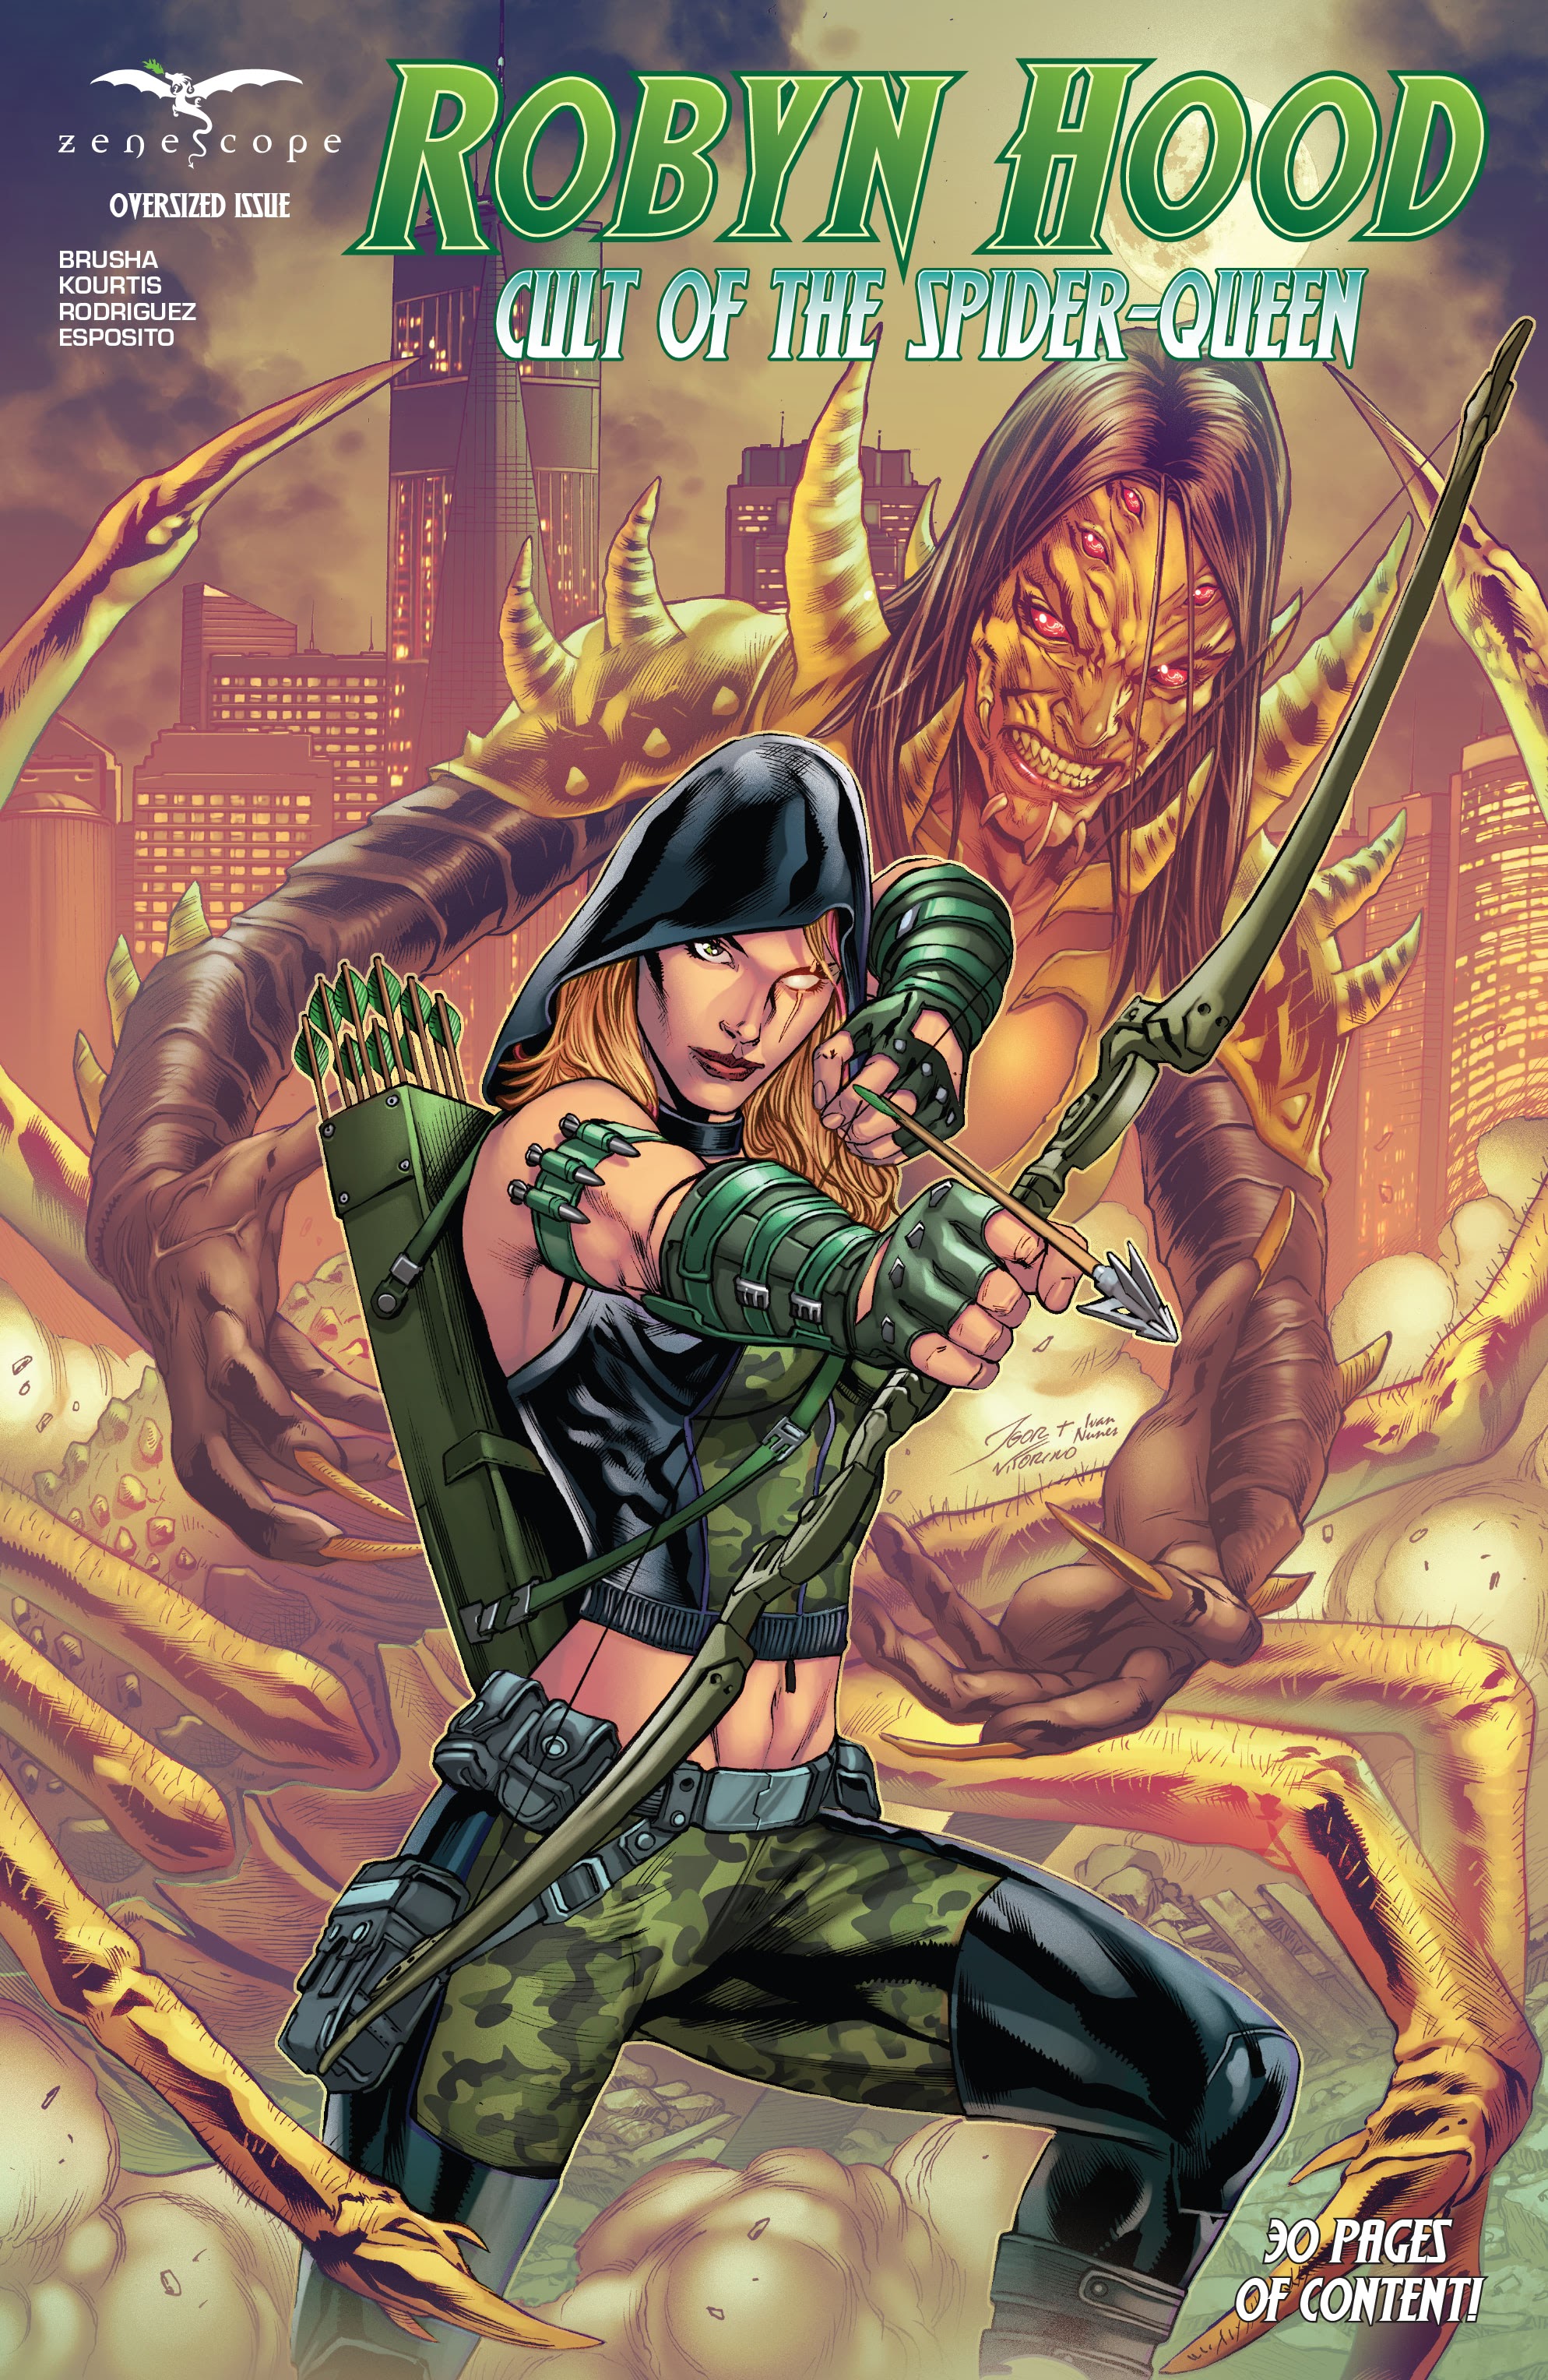 Read online Robyn Hood: Cult of the Spider comic -  Issue # Full - 1